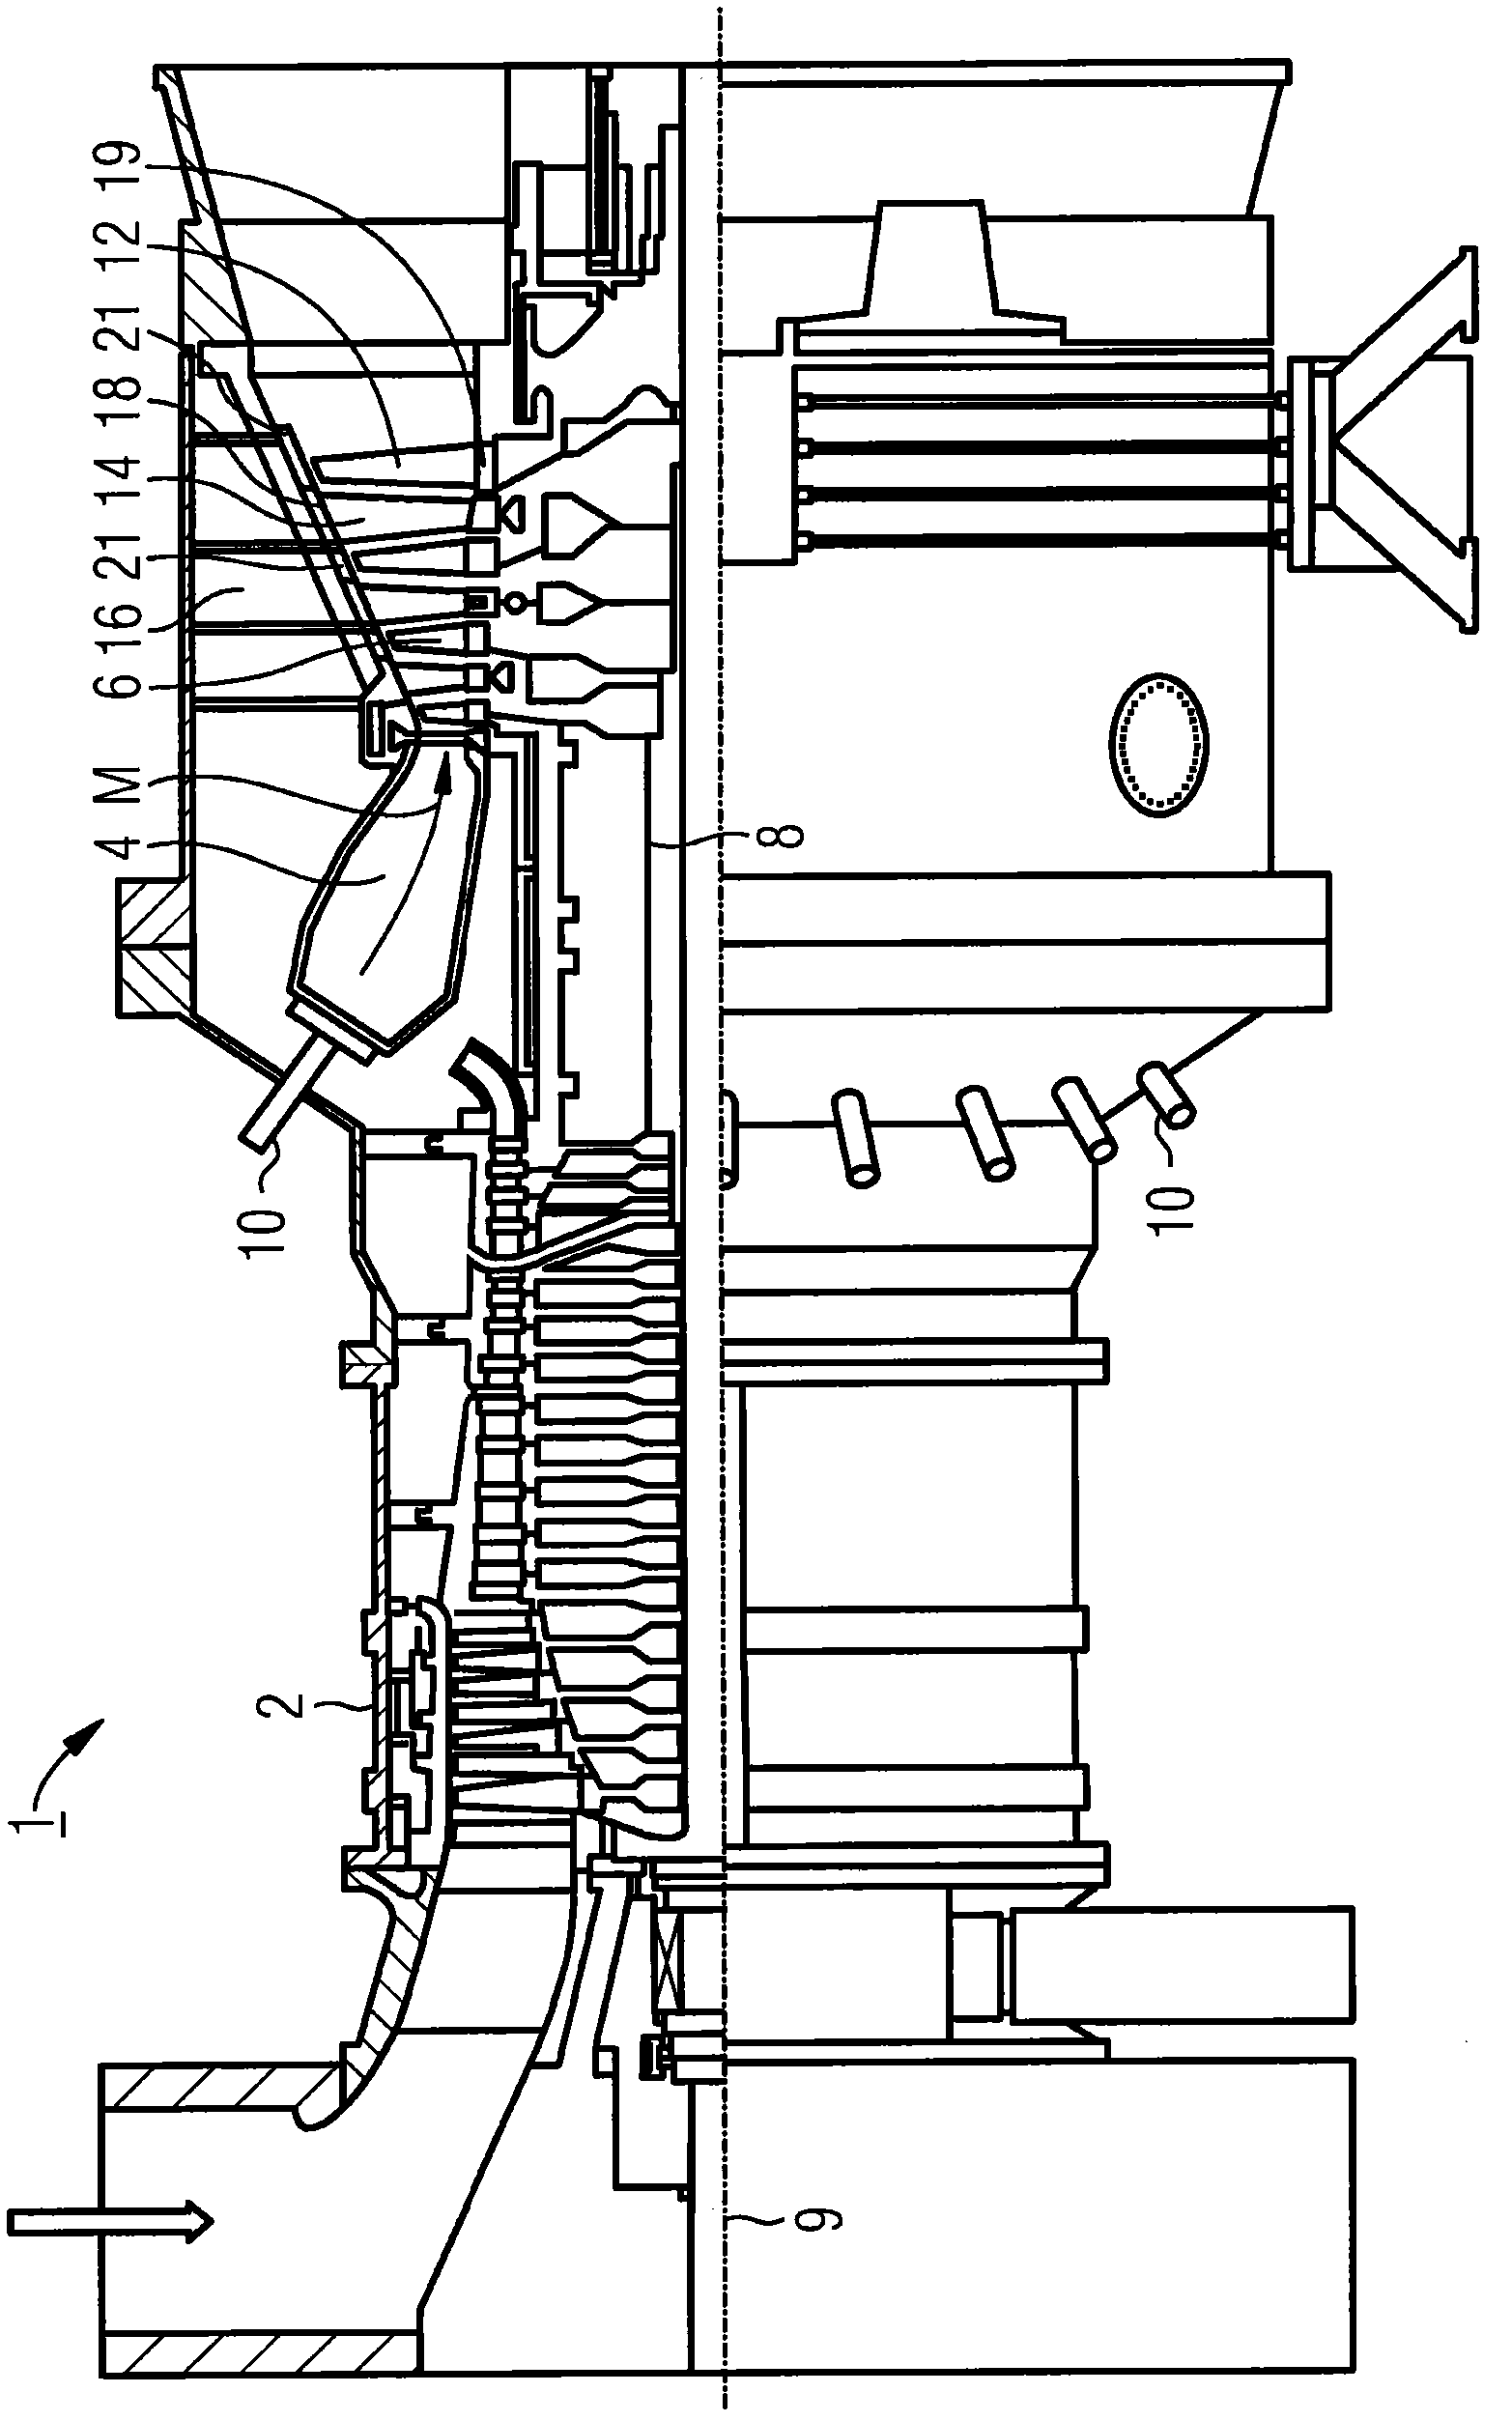 Gas turbine with securing plate between blade base and disk